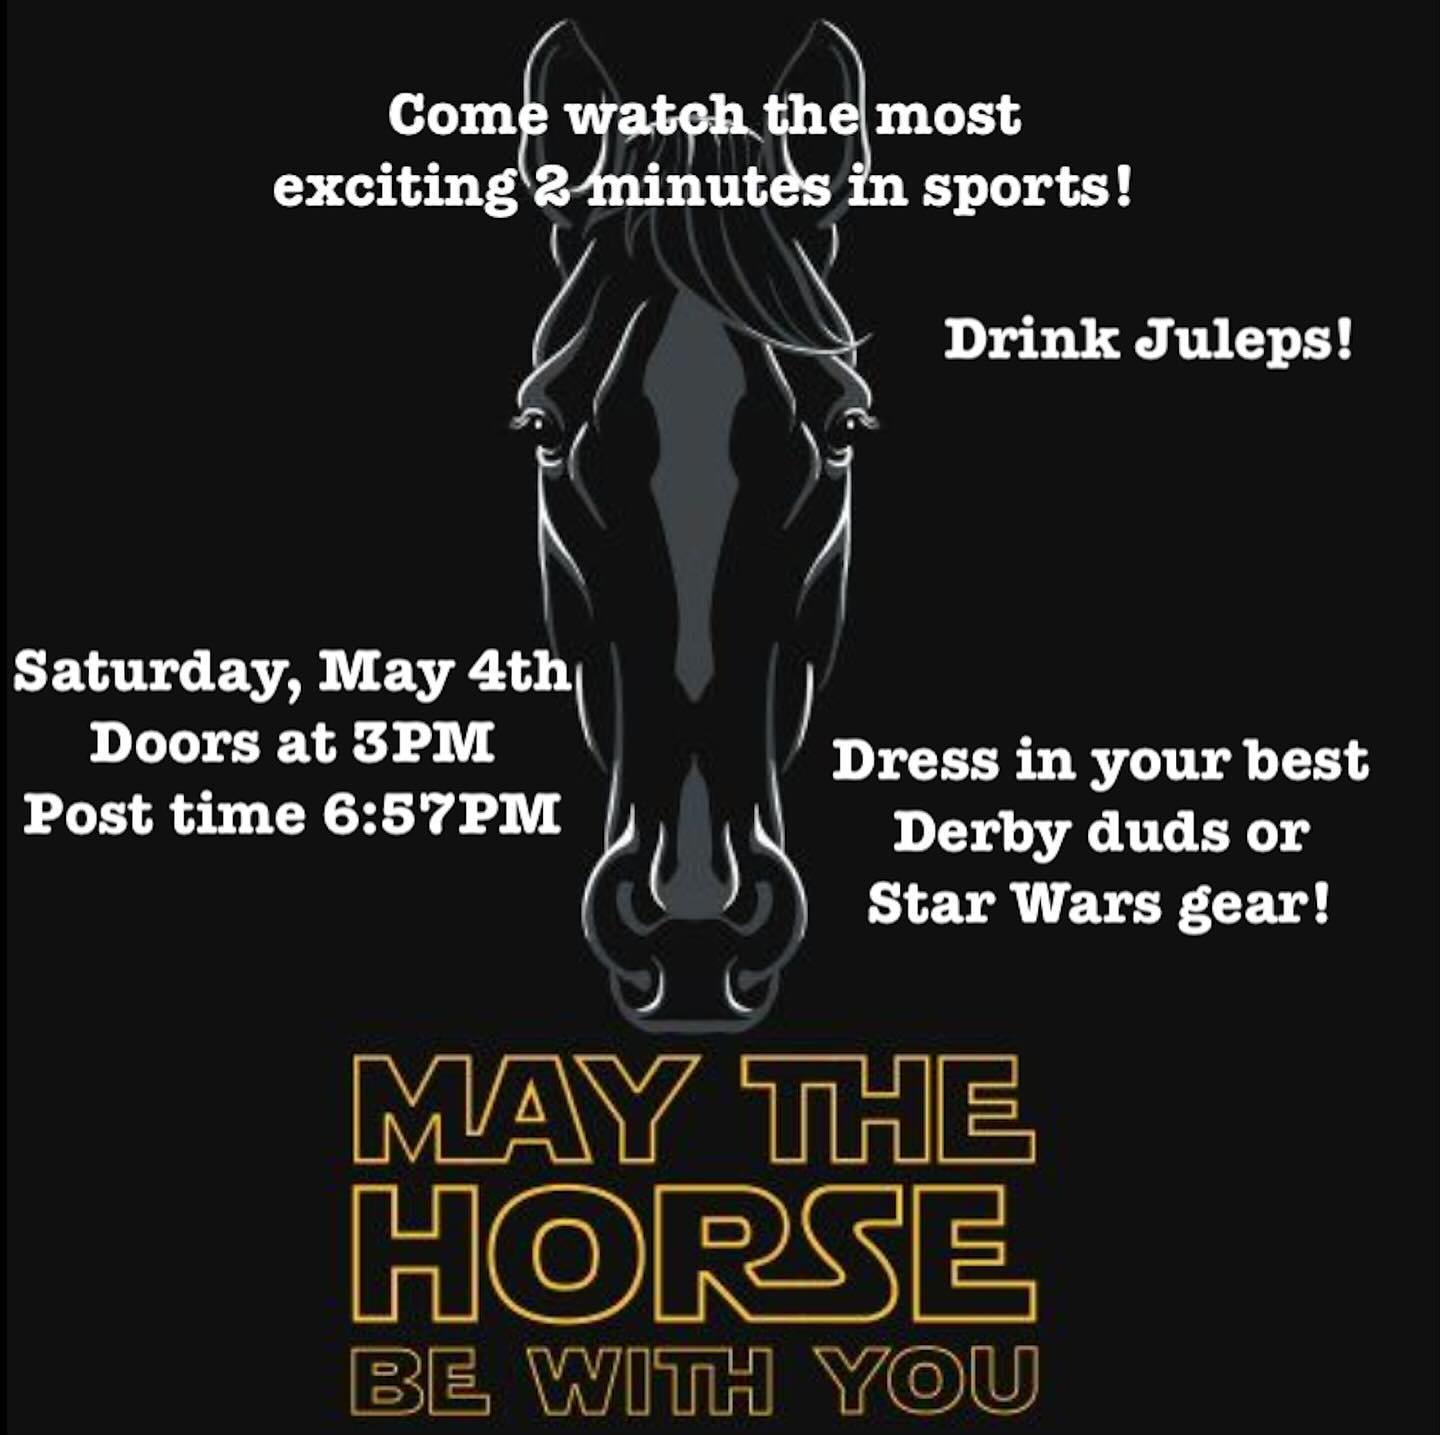 Mint juleps! Tequila juleps! Absinthe frapp&eacute;s! Hats! Star Wars! Oh yea and some horses running but we are most excited about the drinks! This Saturday all day. Come drink&hellip;.#hudsonny #cocktailbar#maythefourth #maythefourthbewithyou #mayt